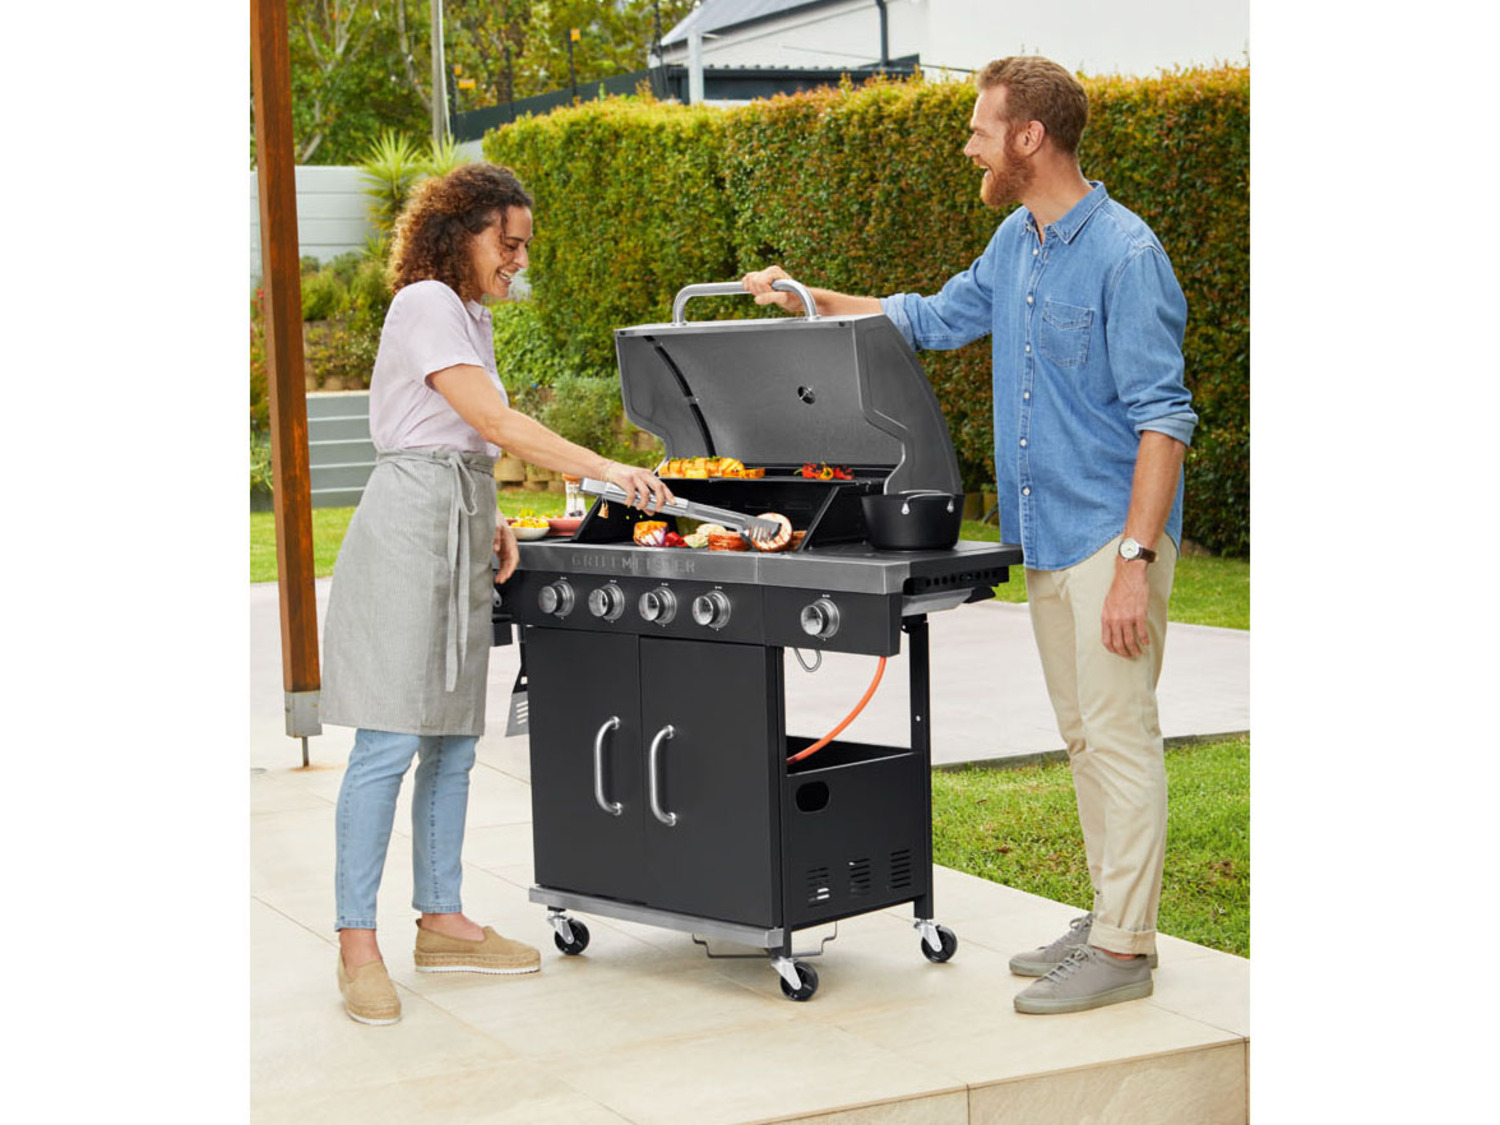 19,7 Gasgrill, GRILLMEISTER kW Brenner, | 4plus1 LIDL